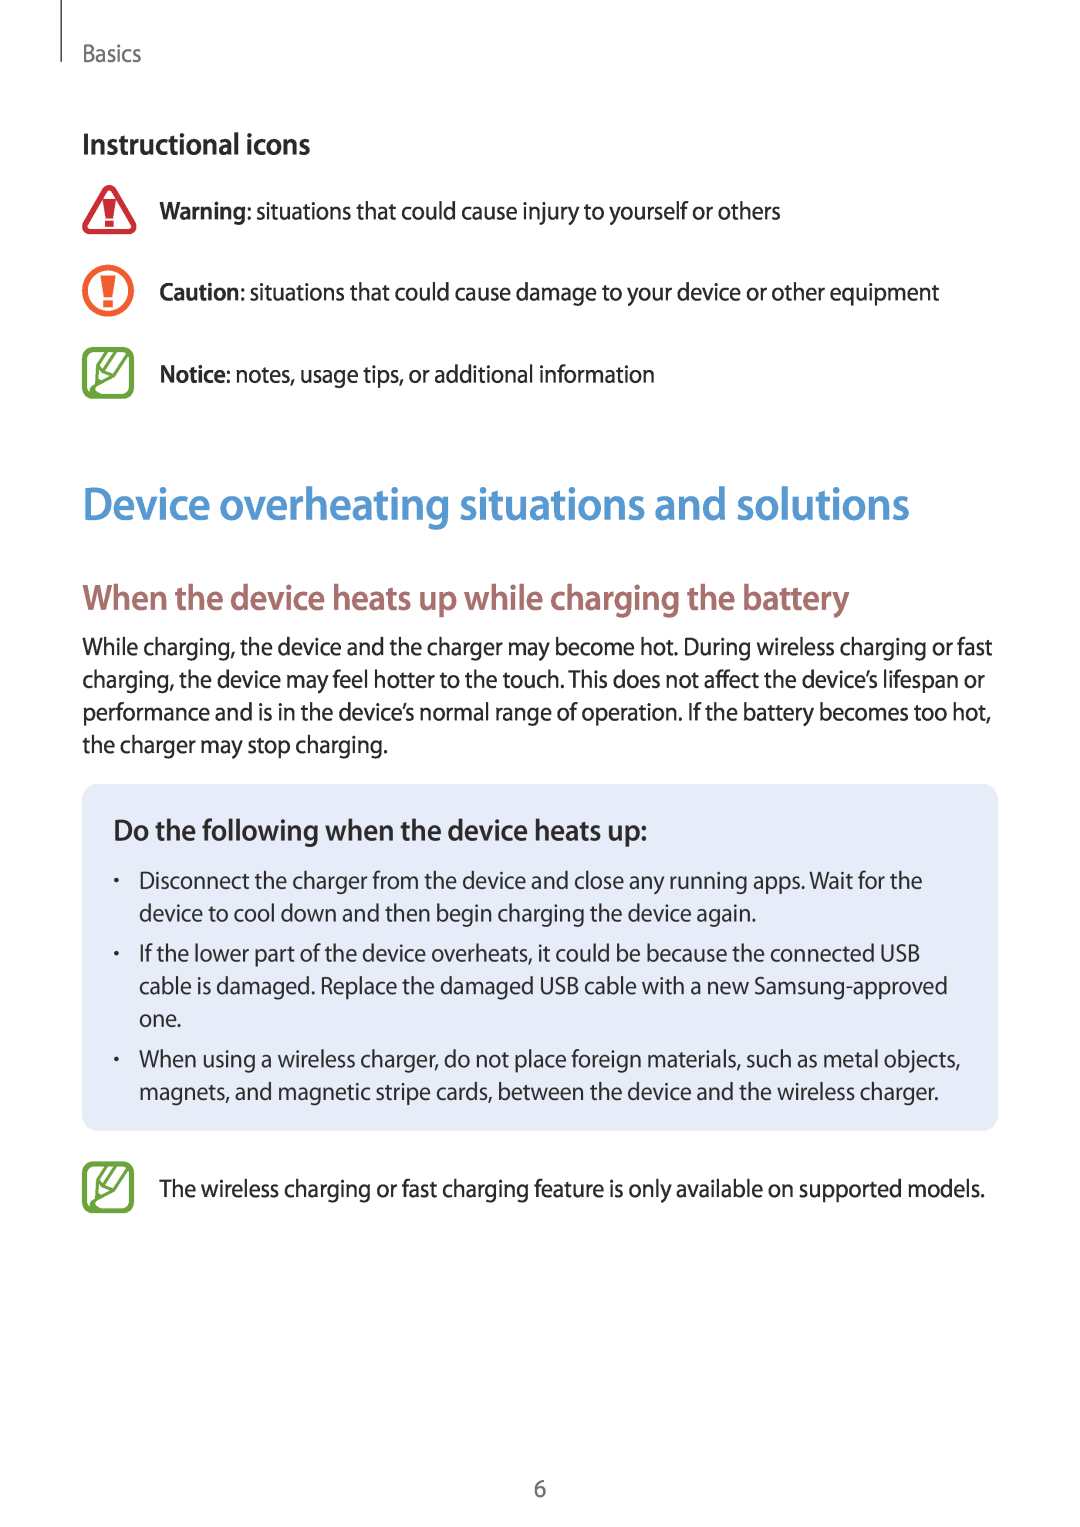 Samsung SM-A320FZINDBT Device overheating situations and solutions, When the device heats up while charging the battery 